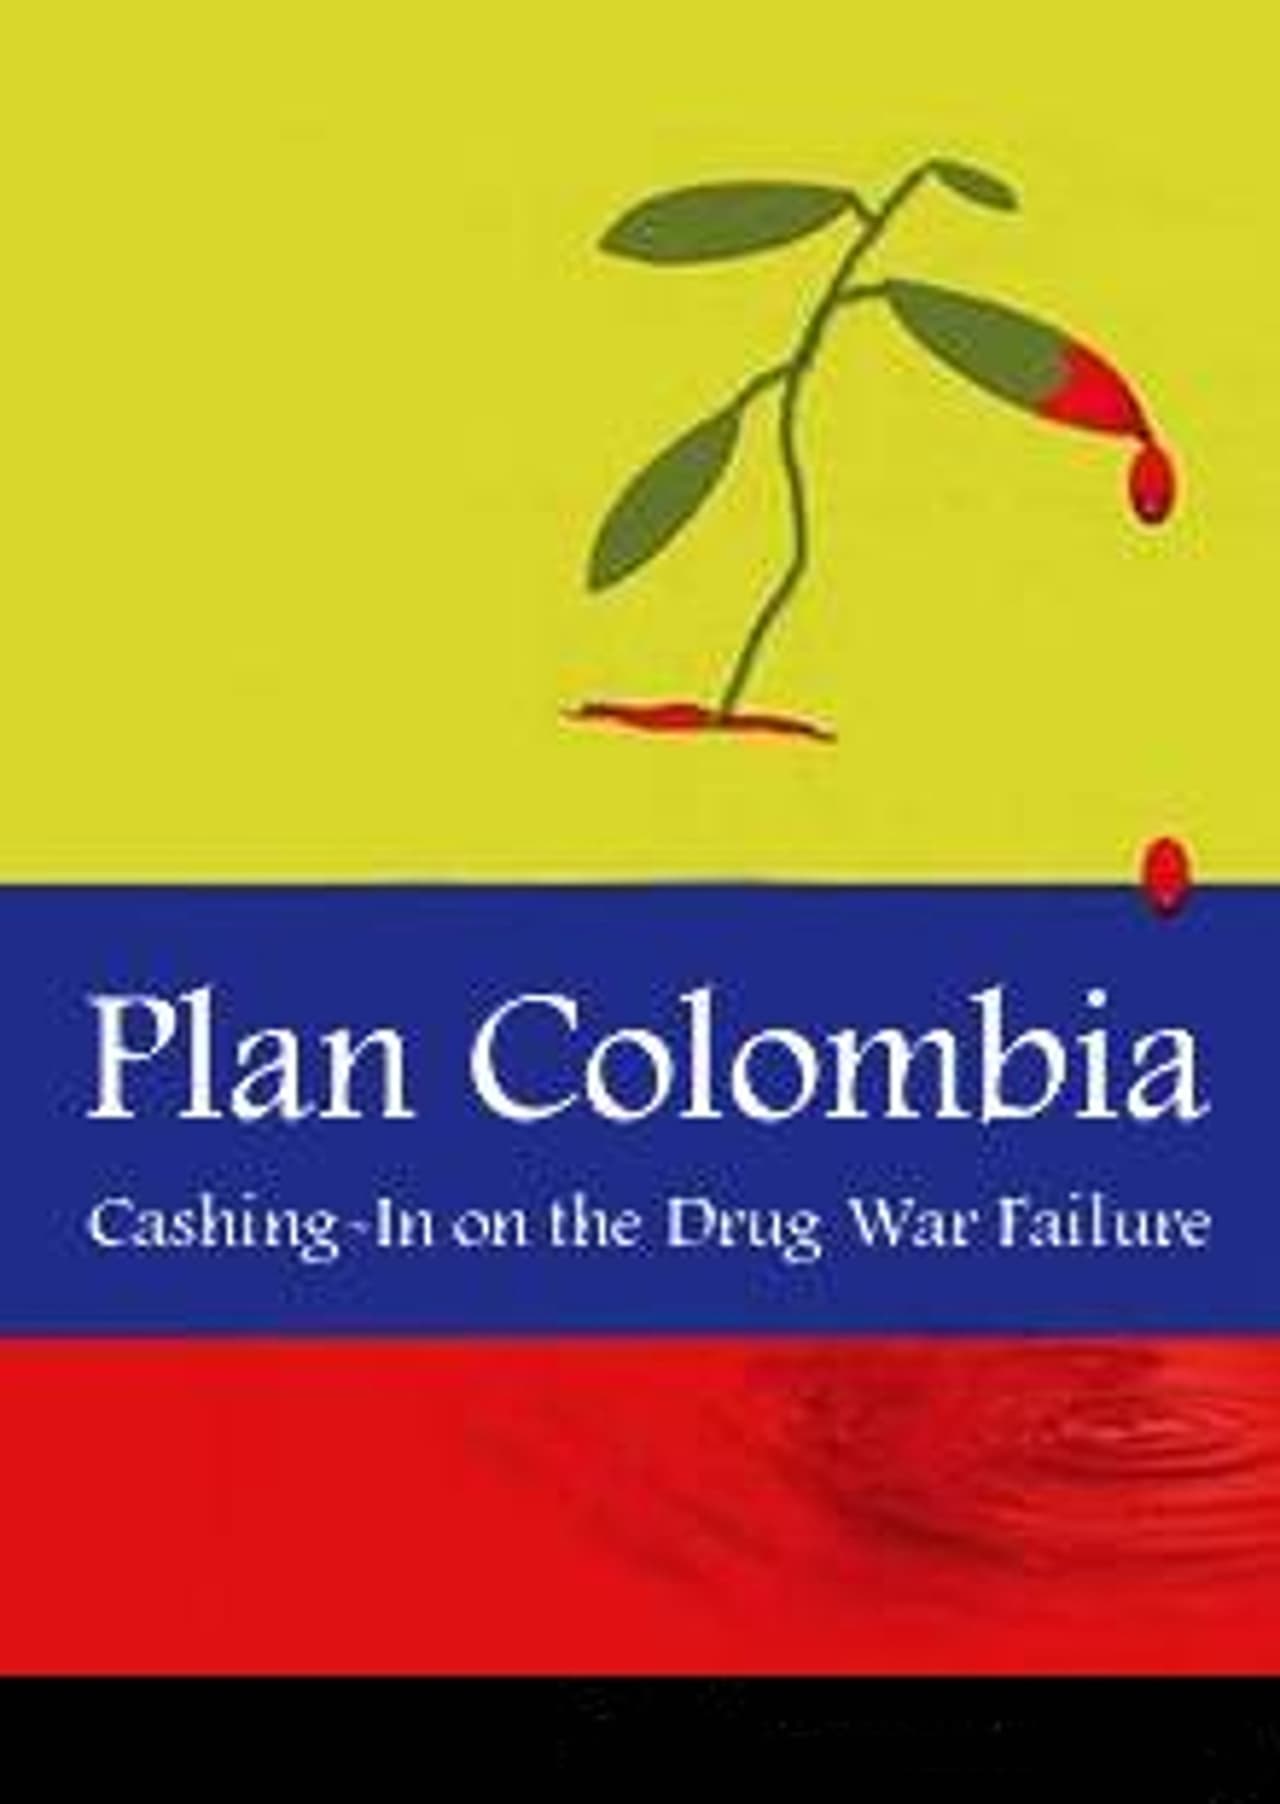 Plan Colombia: Cashing In on the Drug War Failure (2003)